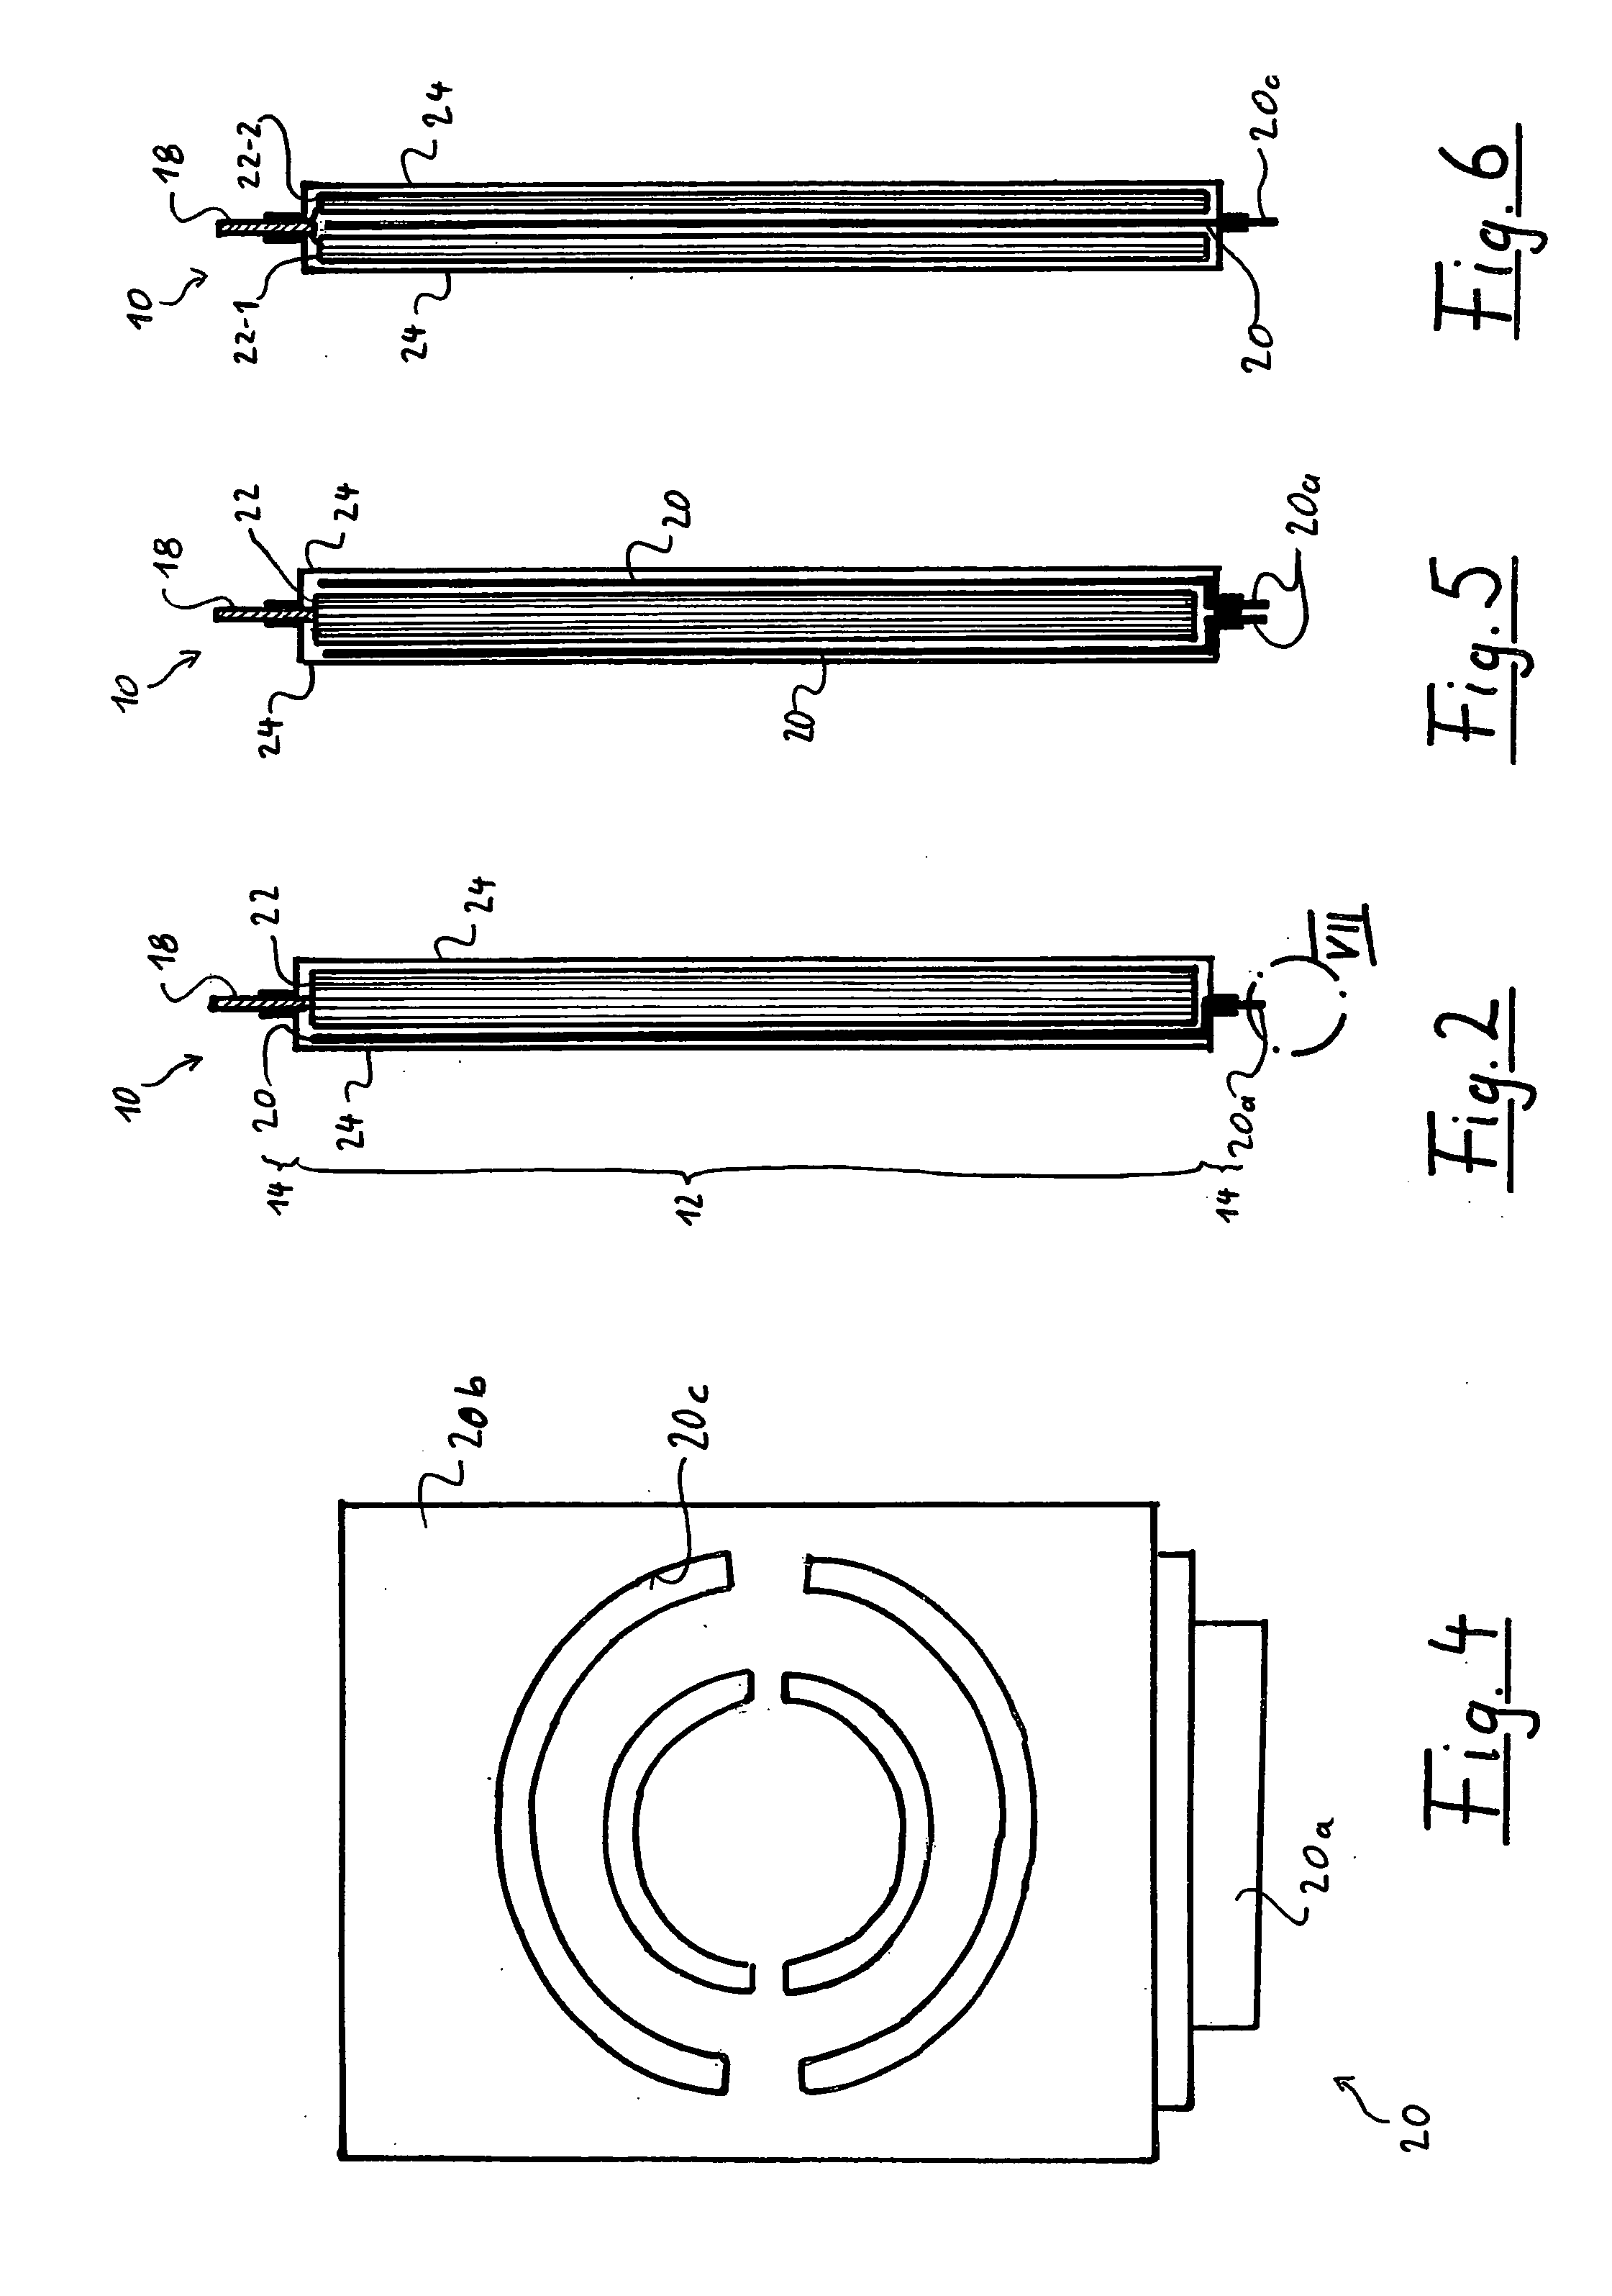 Electrical energy storage cell and apparatus